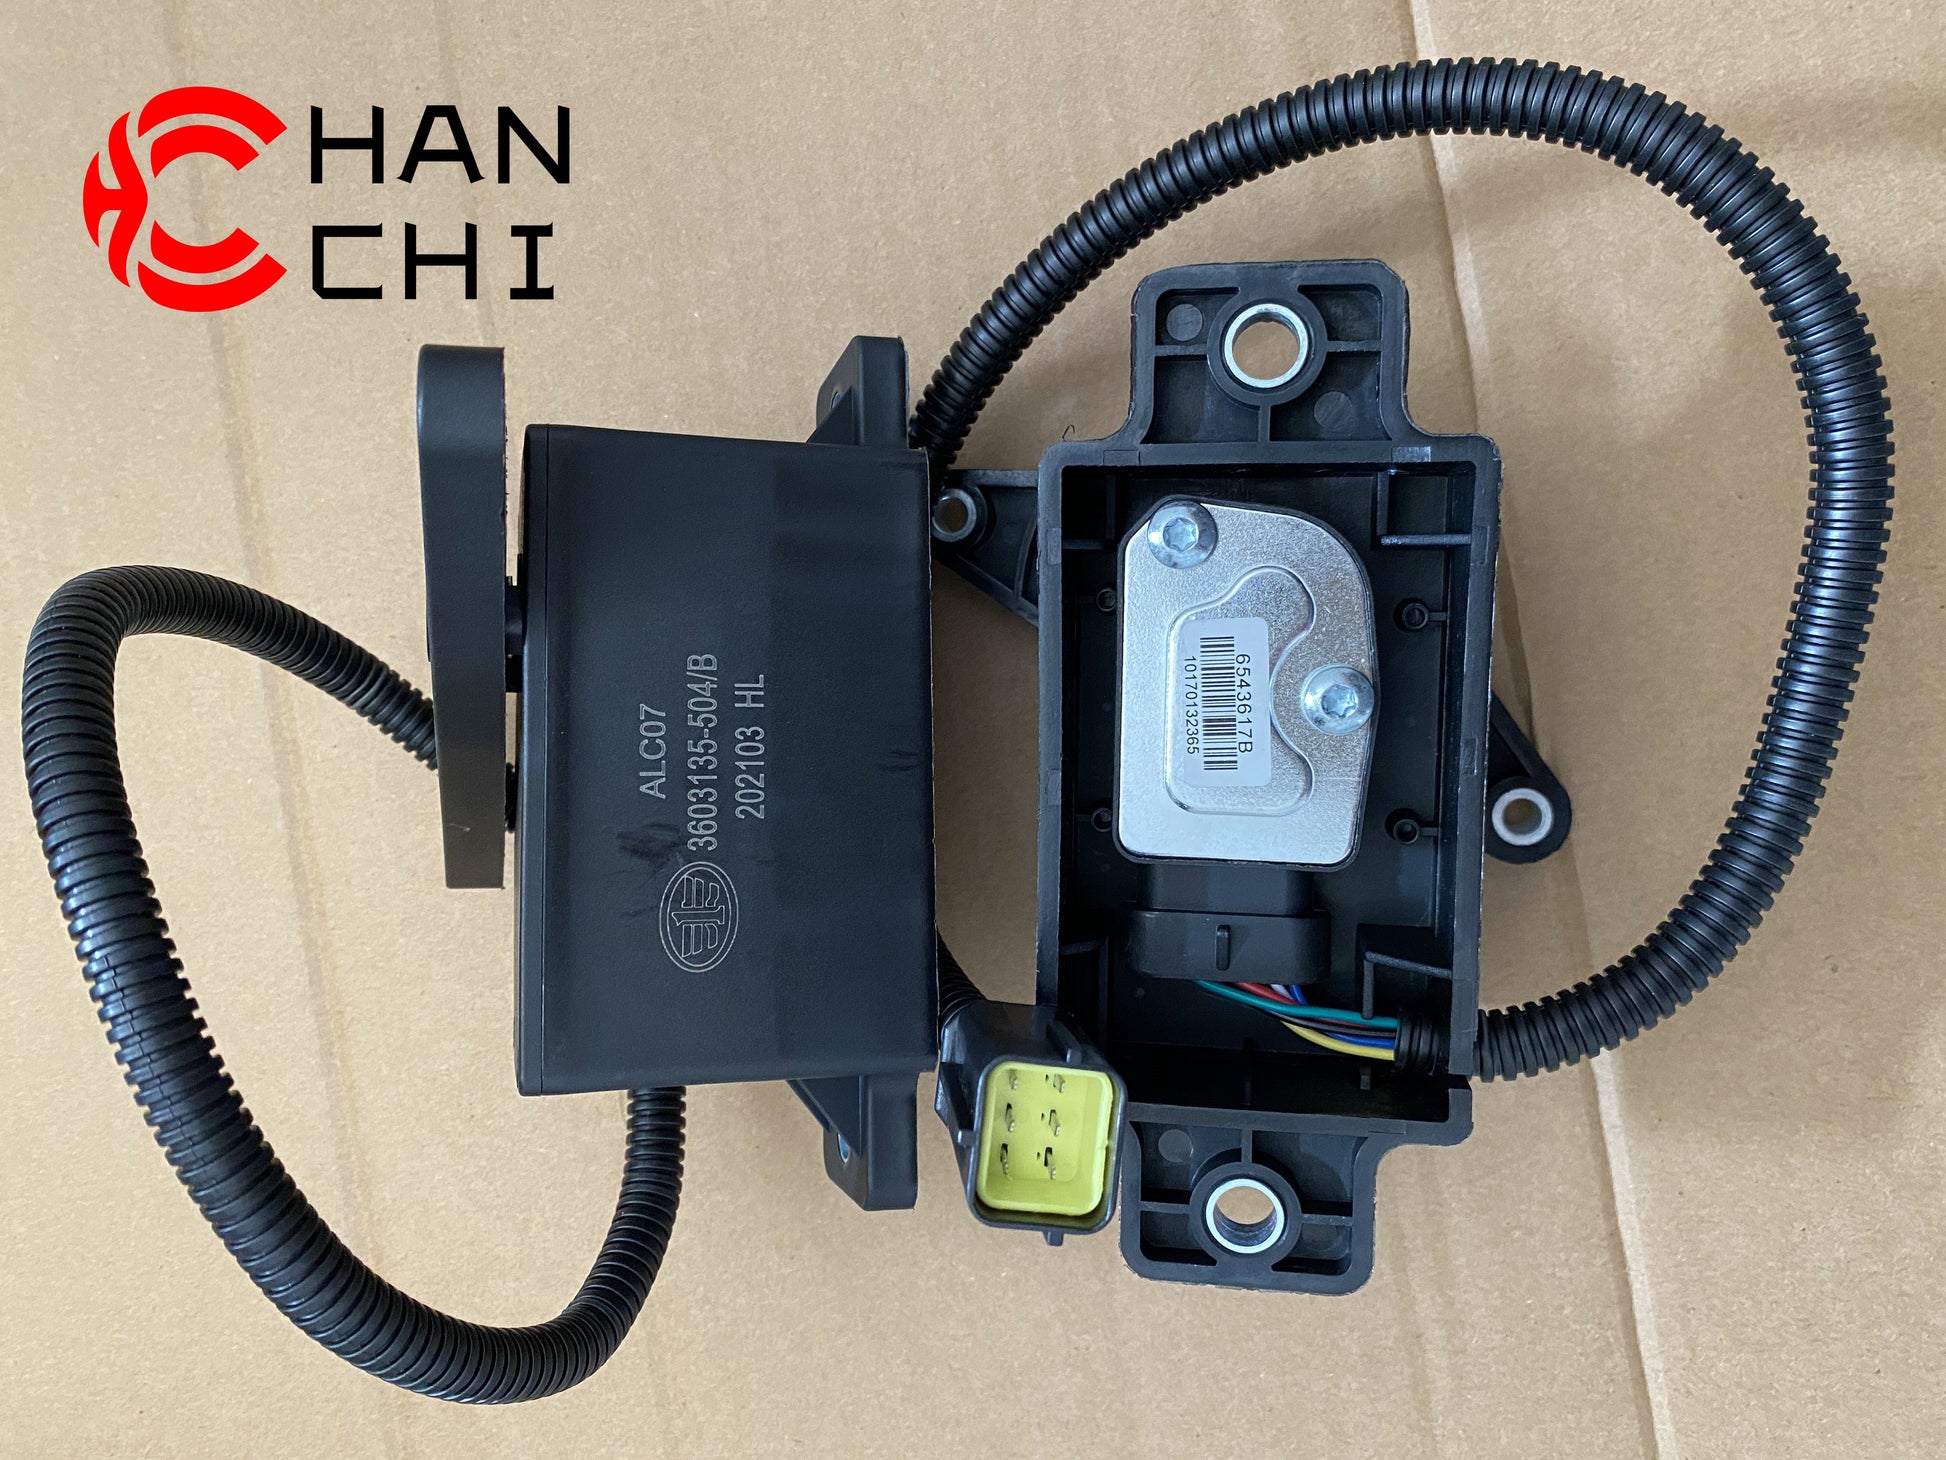 【Description】---☀Welcome to HANCHI☀---✔Good Quality✔Generally Applicability✔Competitive PriceEnjoy your shopping time↖（^ω^）↗【Features】Brand-New with High Quality for the Aftermarket.Totally mathced your need.**Stable Quality**High Precision**Easy Installation**【Specification】OEM：3603135-504BMaterial：ABSColor：blackOrigin：Made in ChinaWeight：1000g【Packing List】1* Electronic Accelerator Pedal 【More Service】 We can provide OEM service We can Be your one-step solution for Auto Parts We can provide te